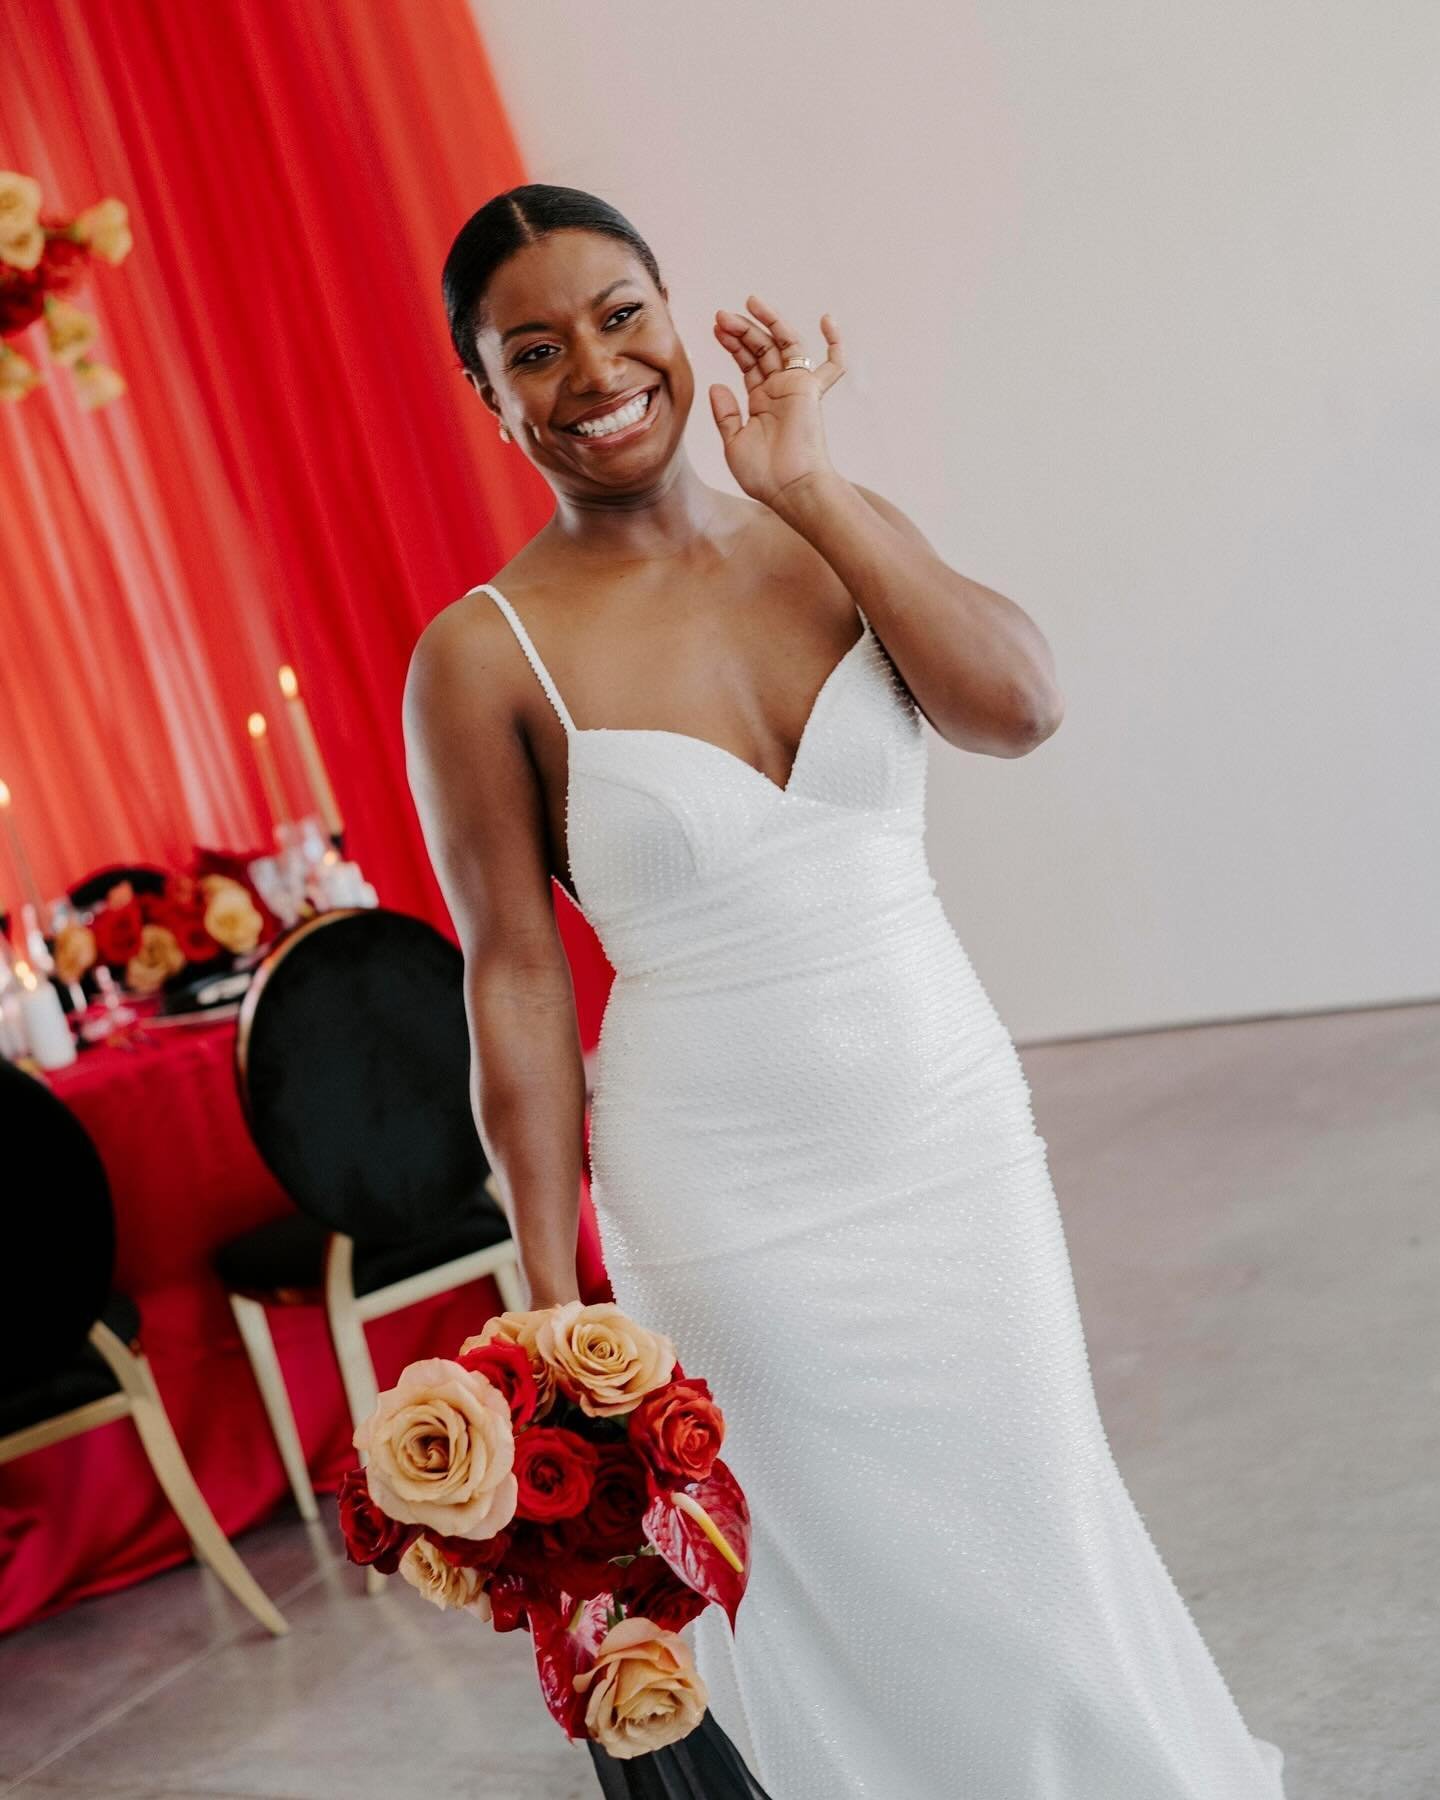 A bit of 🔥❤️&zwj;🔥⁠ for your week
⁠
Vendor Team:⁠
Concept, Planning + Styling @acarletonweddings⁠
Venue @le.peaches.and.cream⁠
Florals @amflorals⁠
Hair &amp; Makeup @erinheatherbeauty
Dress @sindersbridal⁠
Stationery @aviscribbles⁠
Ring @storbymarg